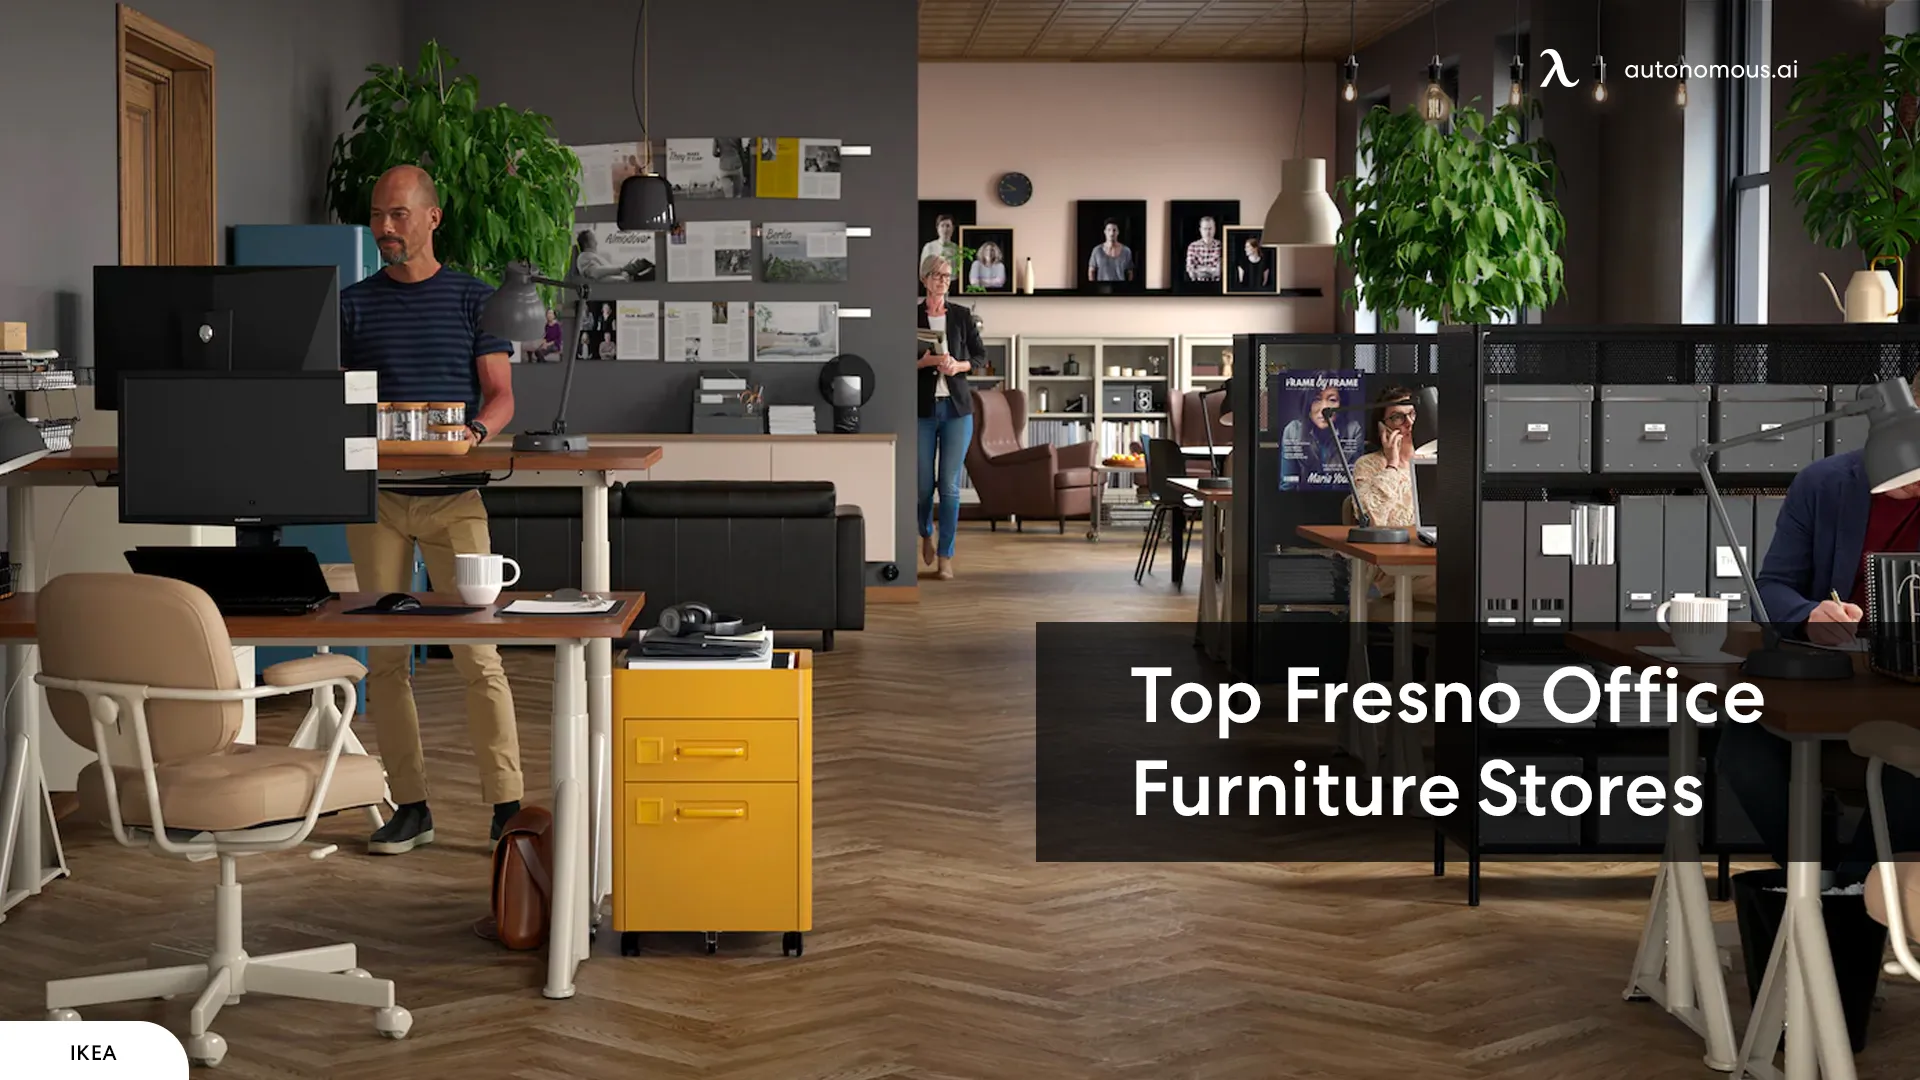 Fresno Office Furniture: Top Choices & Buying Guide